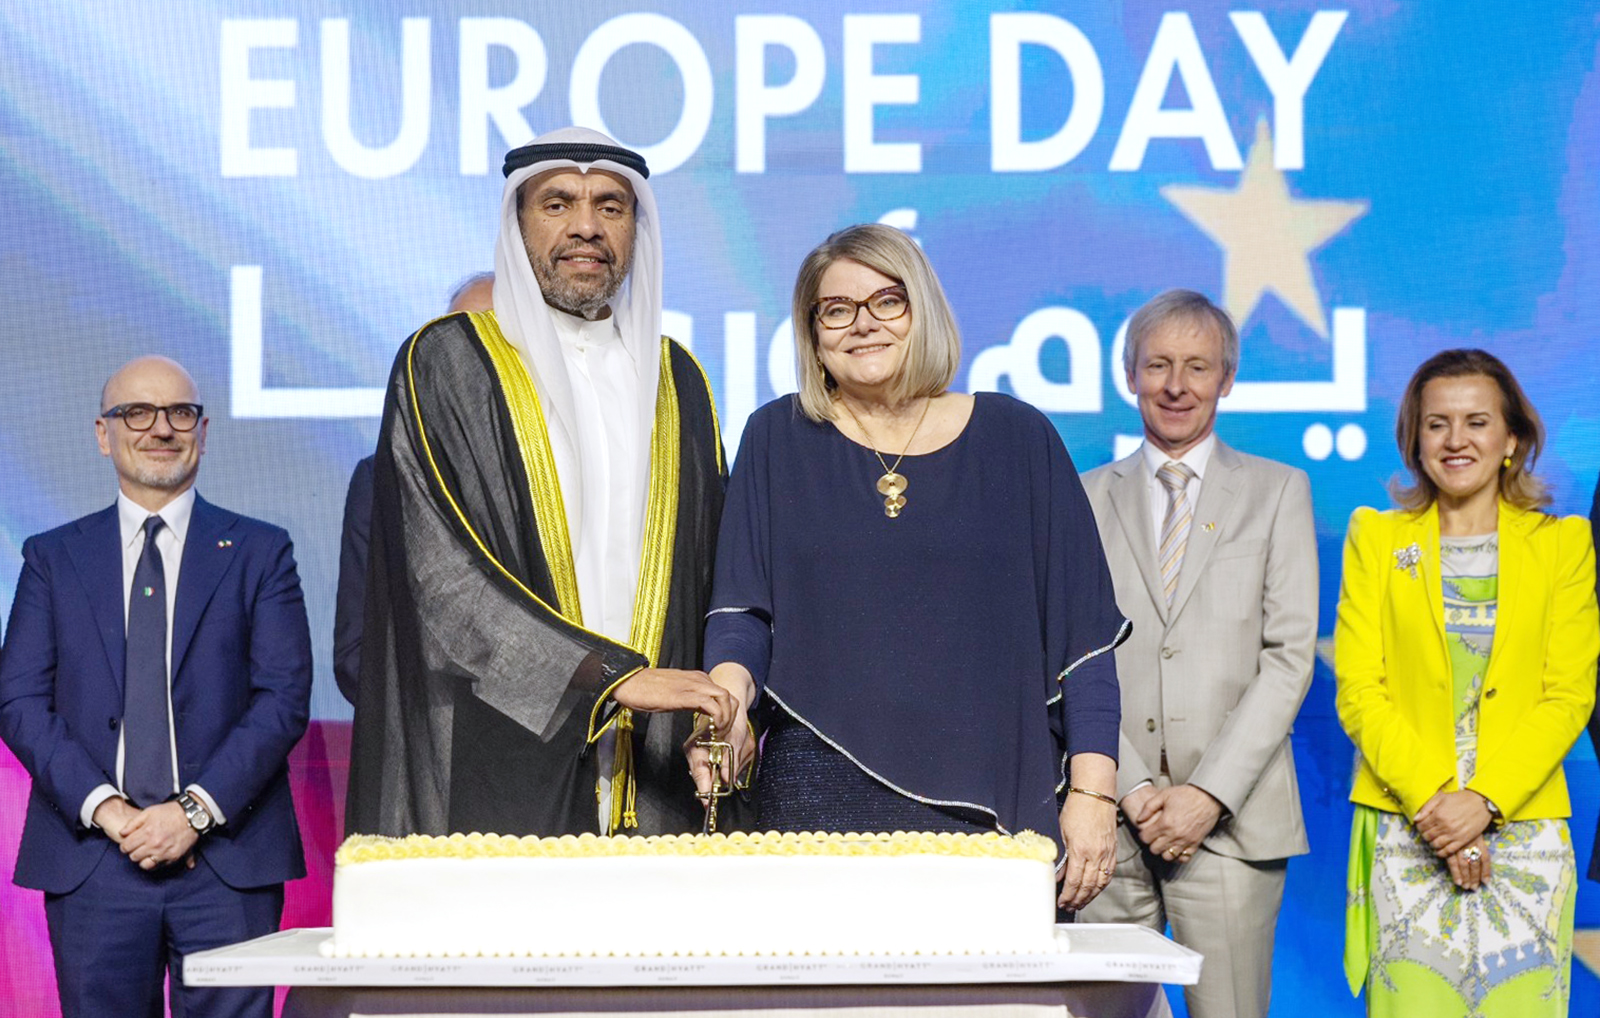 Kuwait Foreign Minister partakes in Europe Day celebration